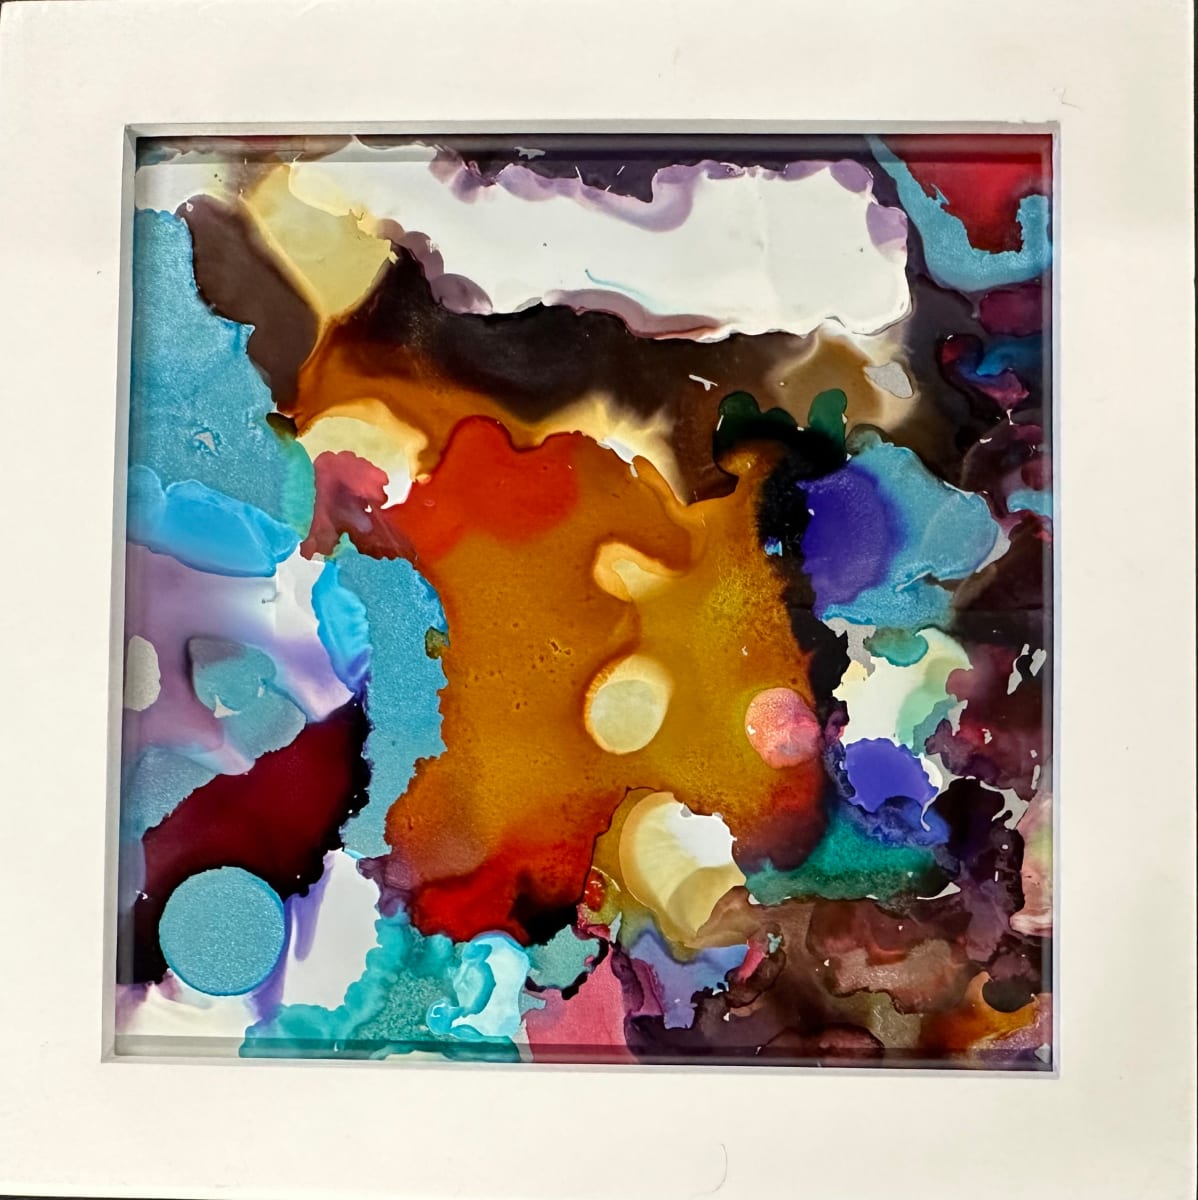 Geological Yearning (framed) by Bonnie Levinson 